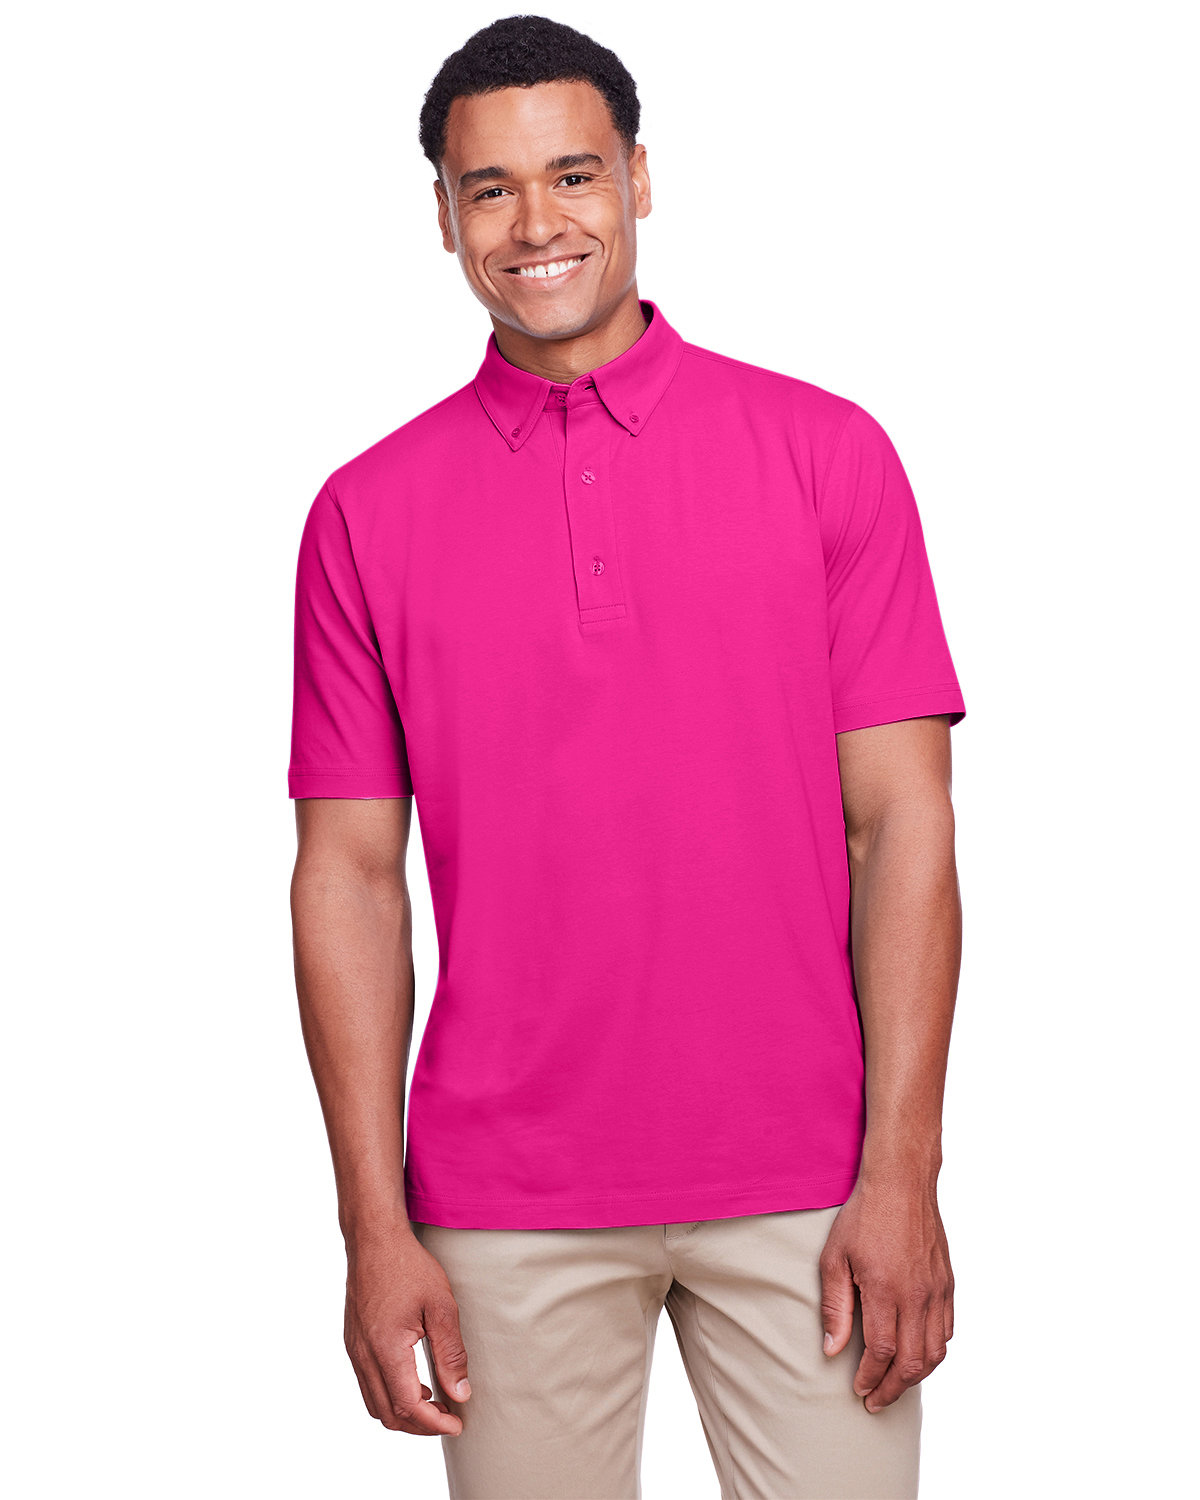 UltraClub Men's Lakeshore Stretch Cotton Performance Polo HELICONIA 